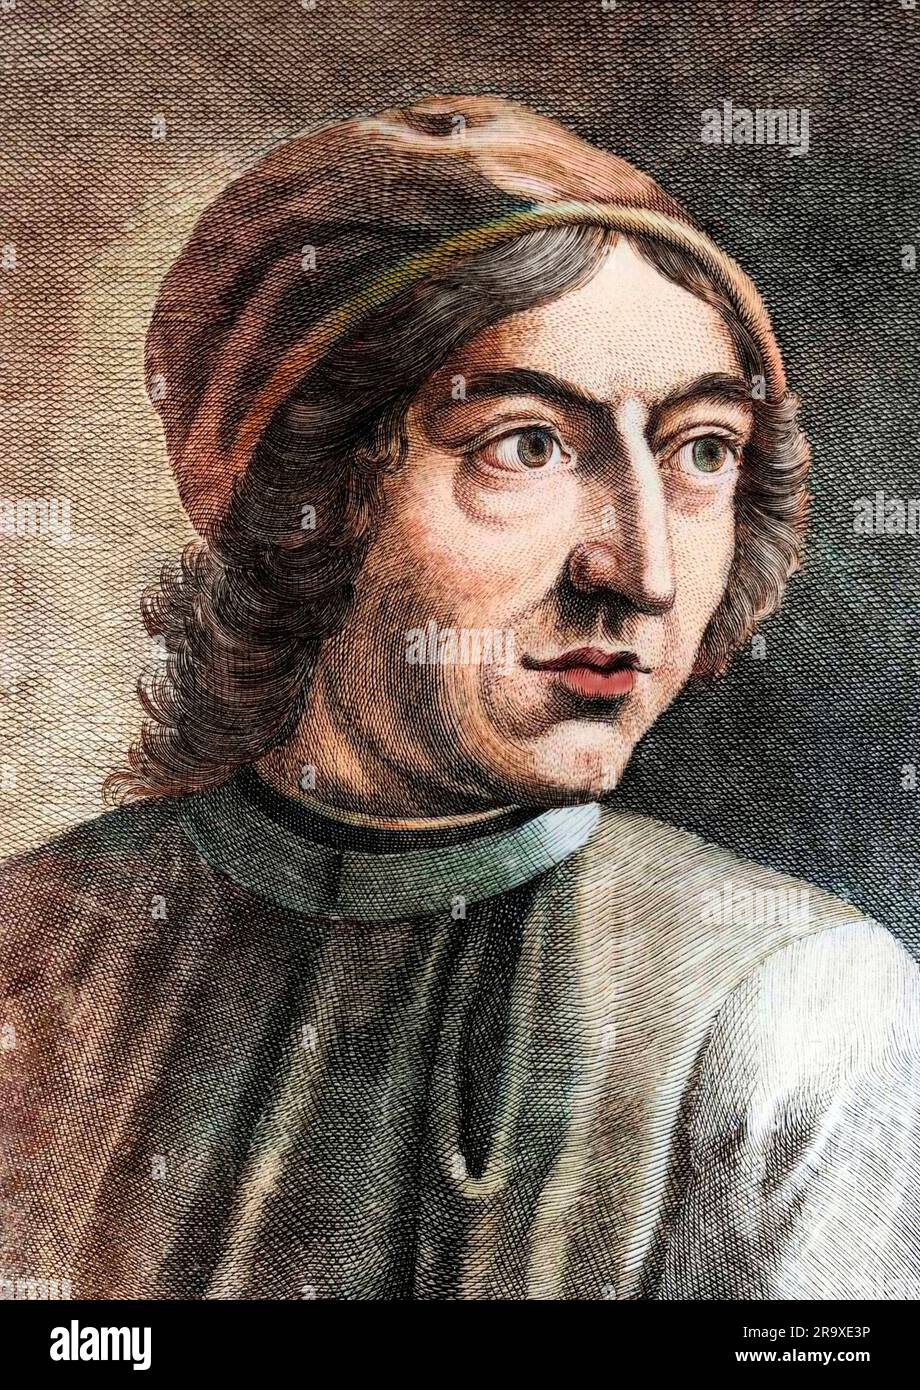 portrait de Angelo Poliziano ( Ange Policien ) humaniste italien 1454-1494.Portrait of Angelo Ambrogini known as Poliziano (1454-1494), Italian writer, humanist and playwright, Stock Photo